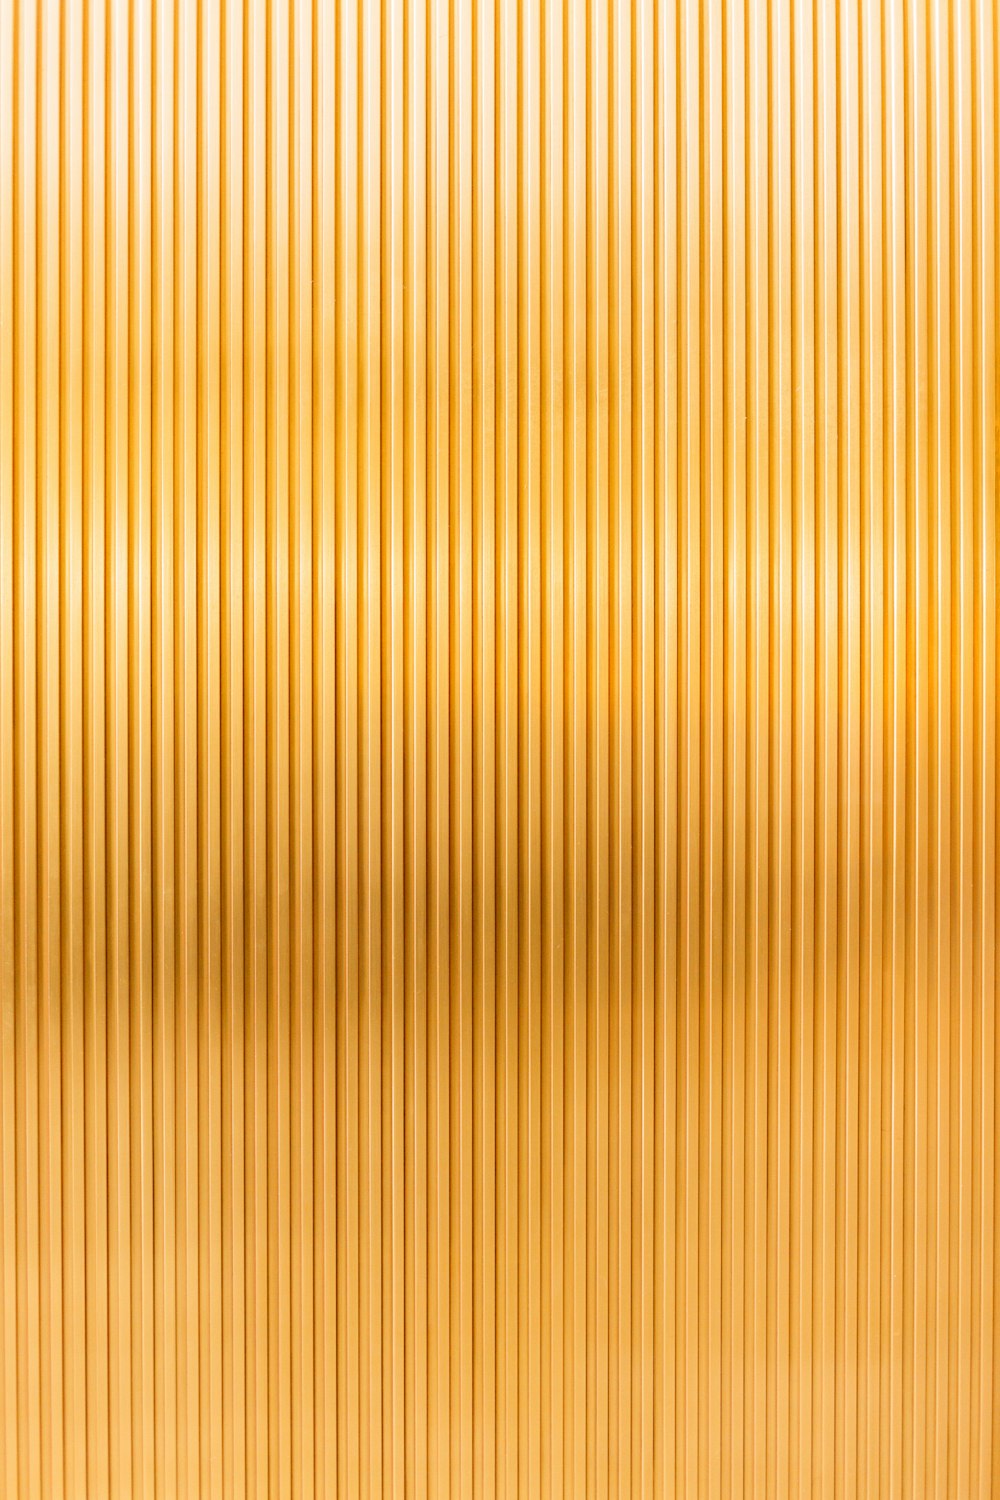 Gold paper background image Stock Photo by ©hiro-k 110952390